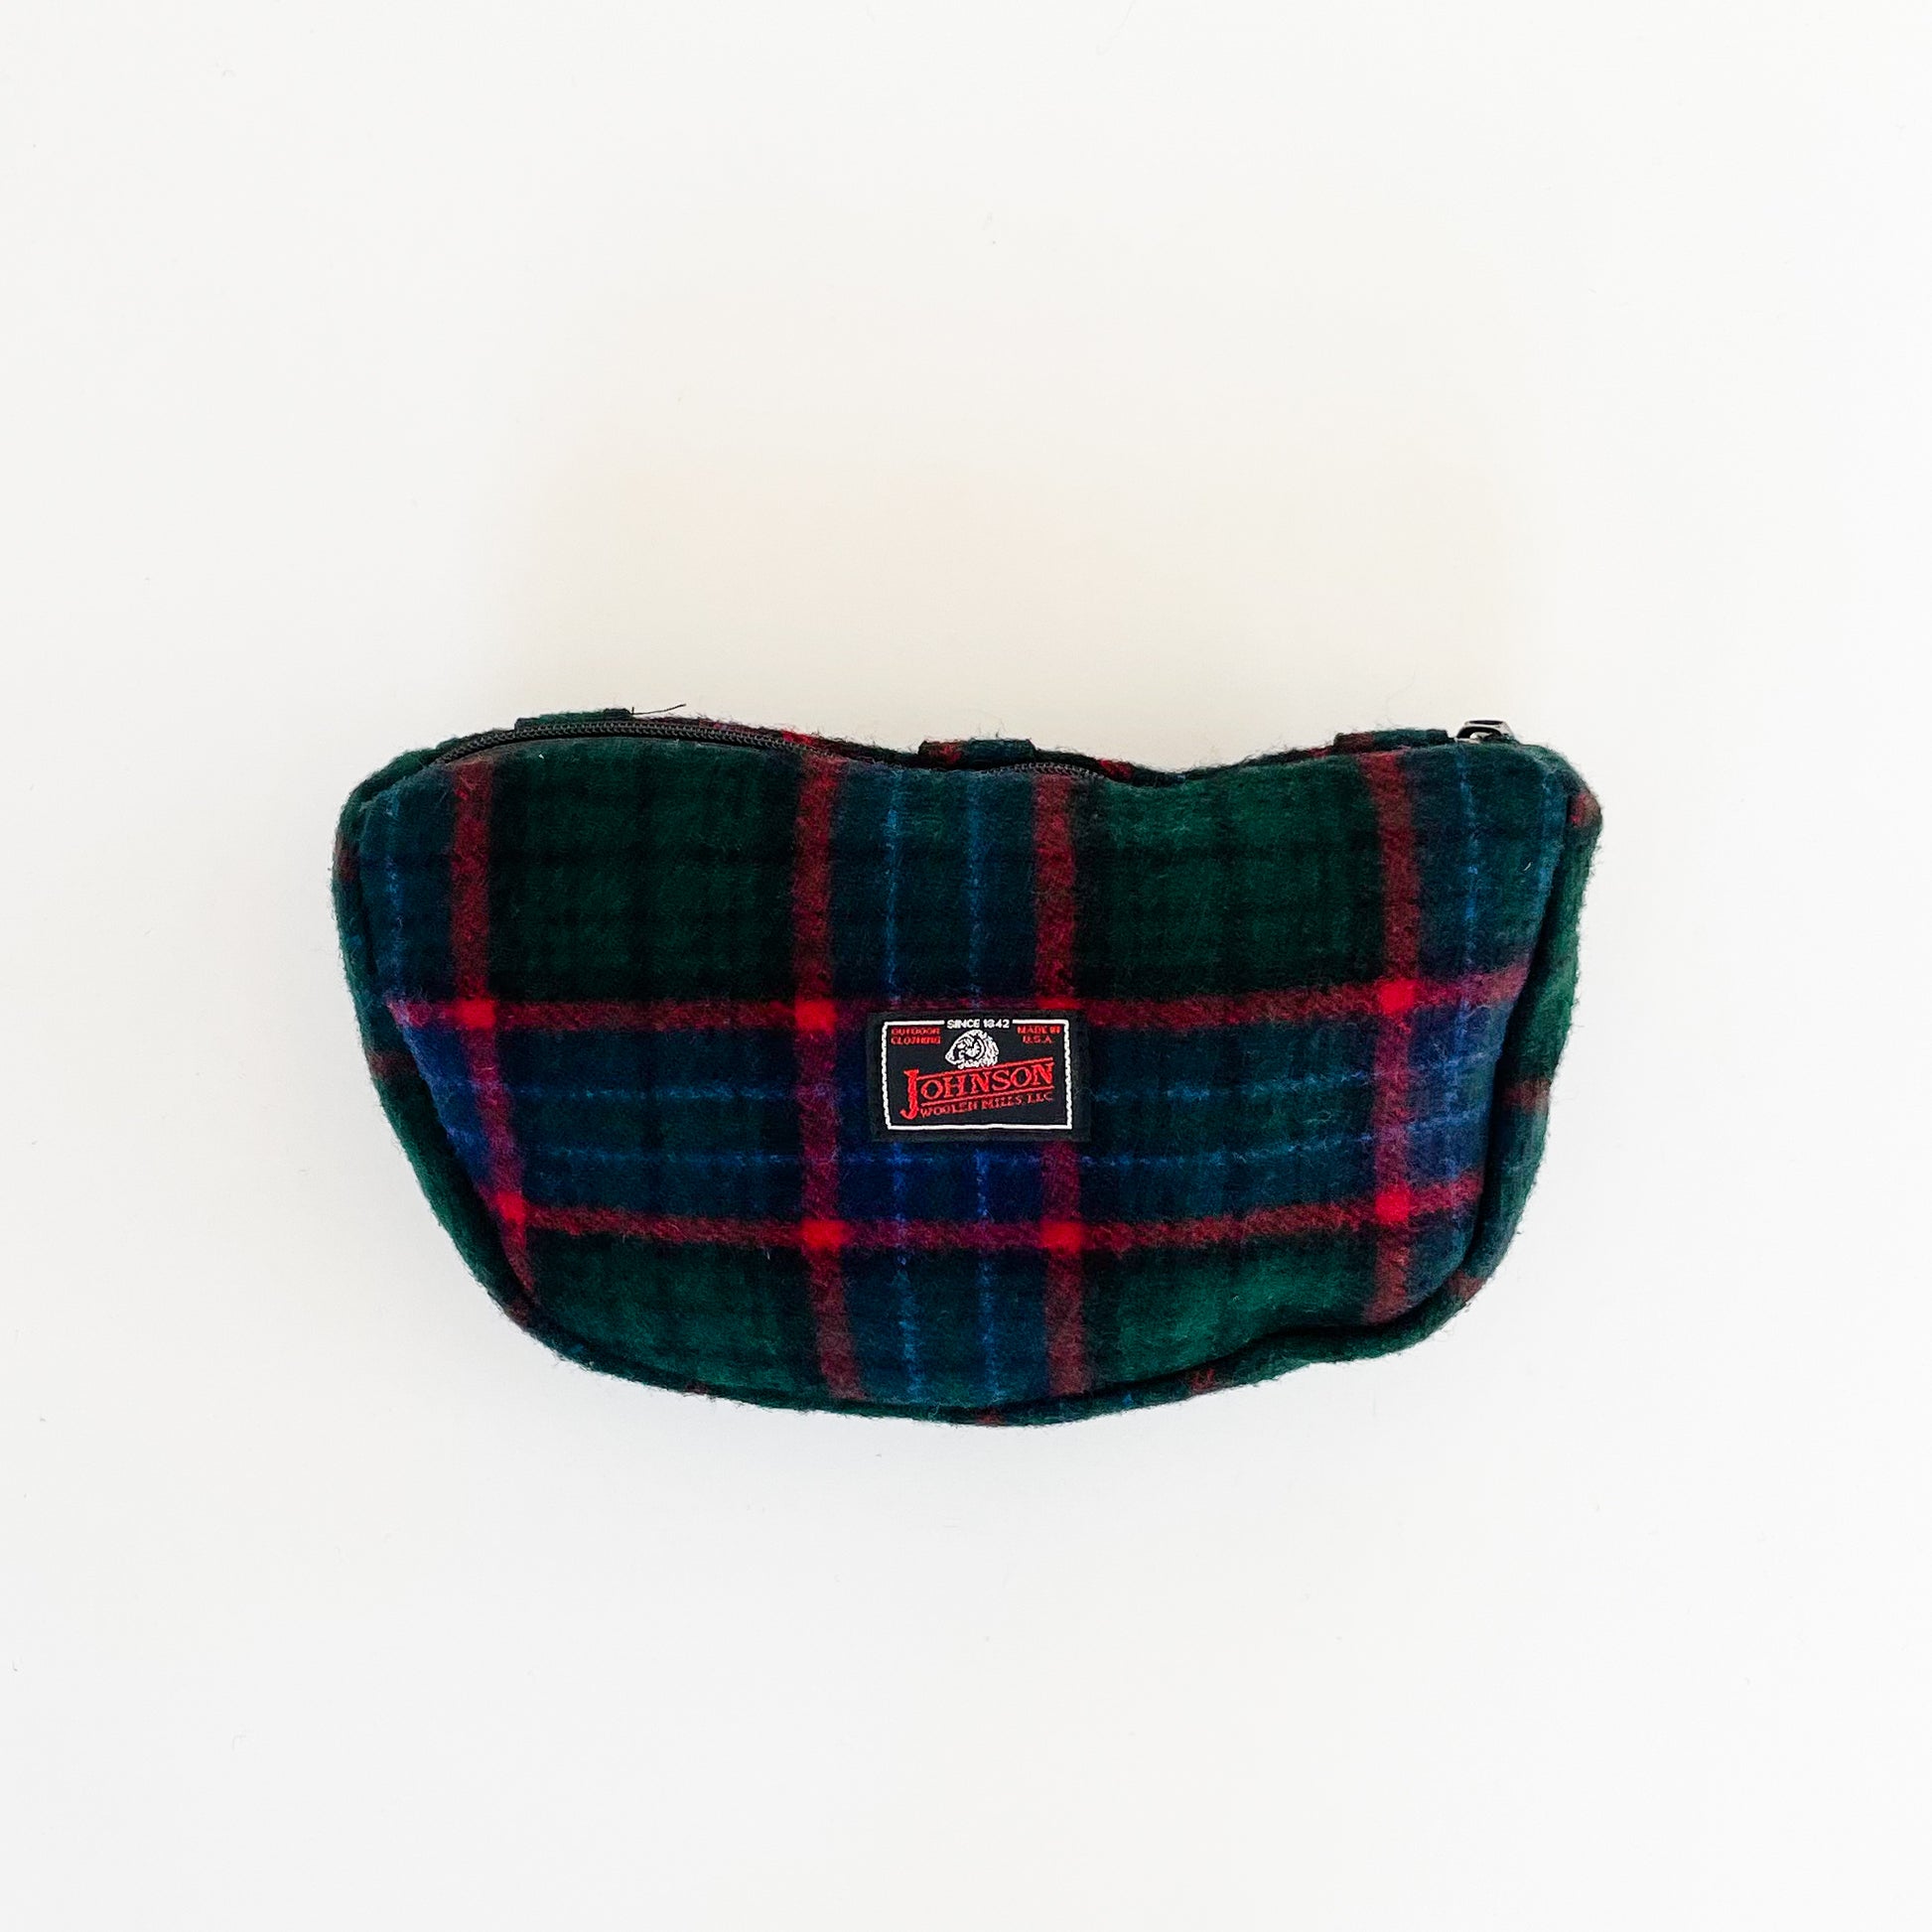 Wool sidewinder - bag with zipped closure and belt loops for wearing on your waist. Shown in green, blue and red plaid.